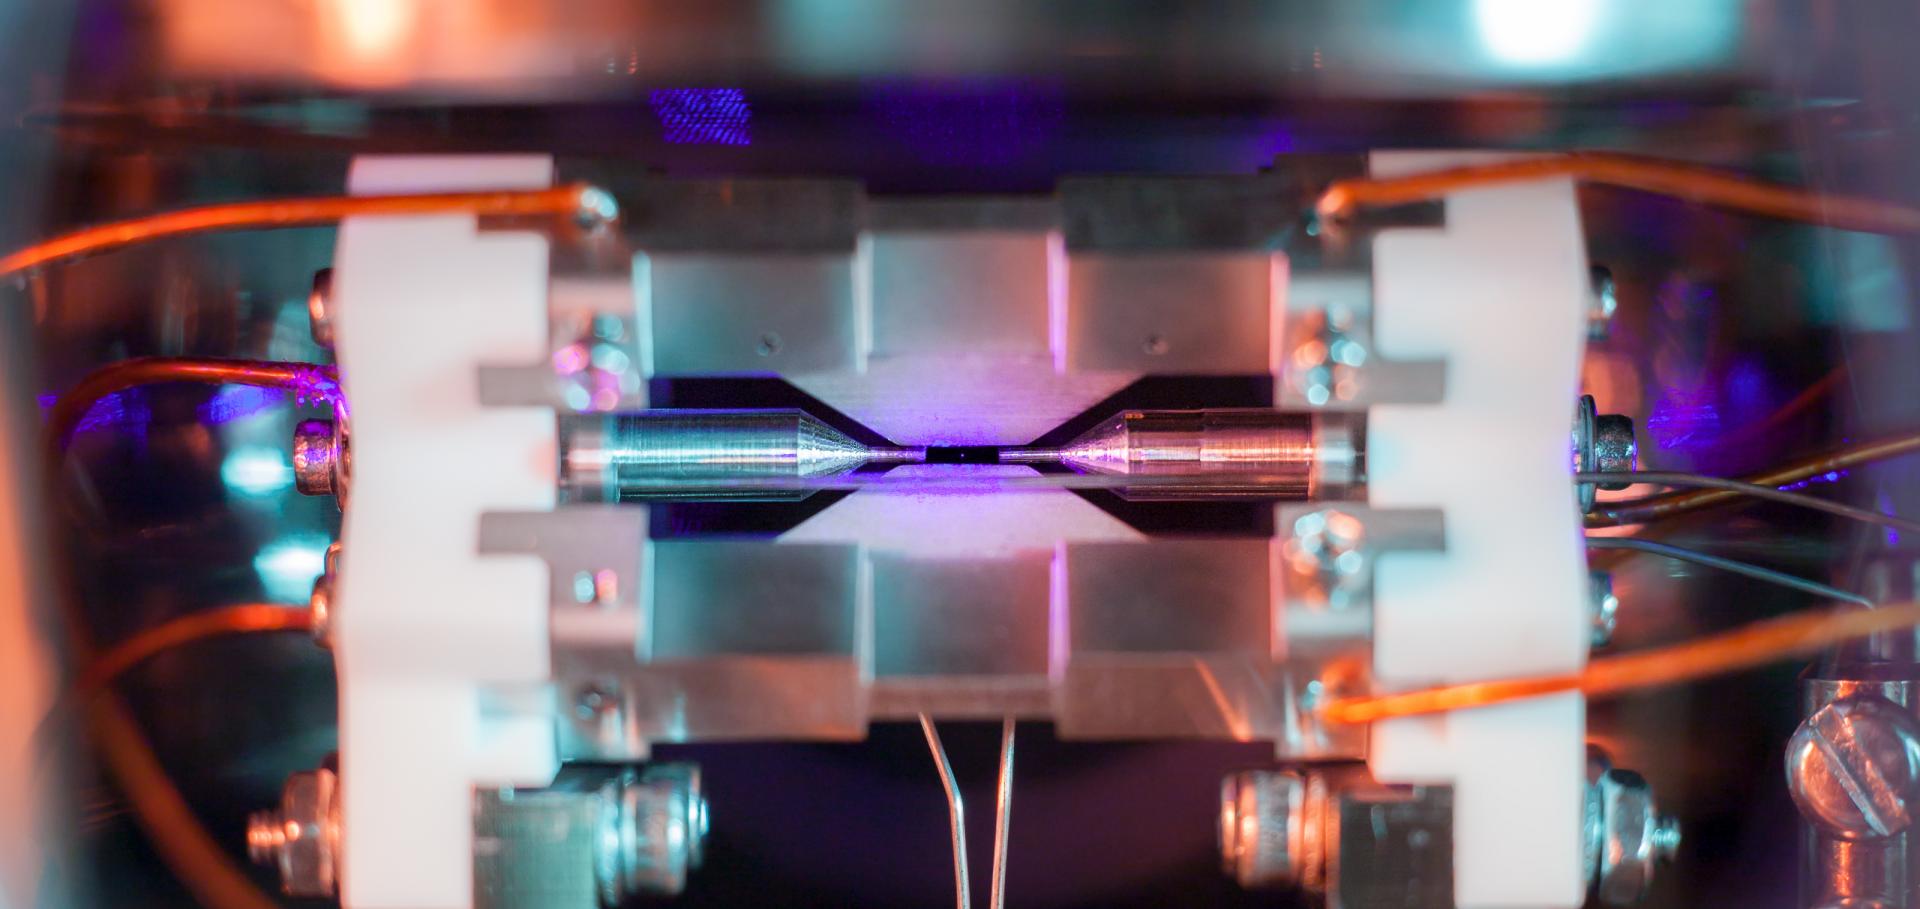 Single strontium atom in an ion trap